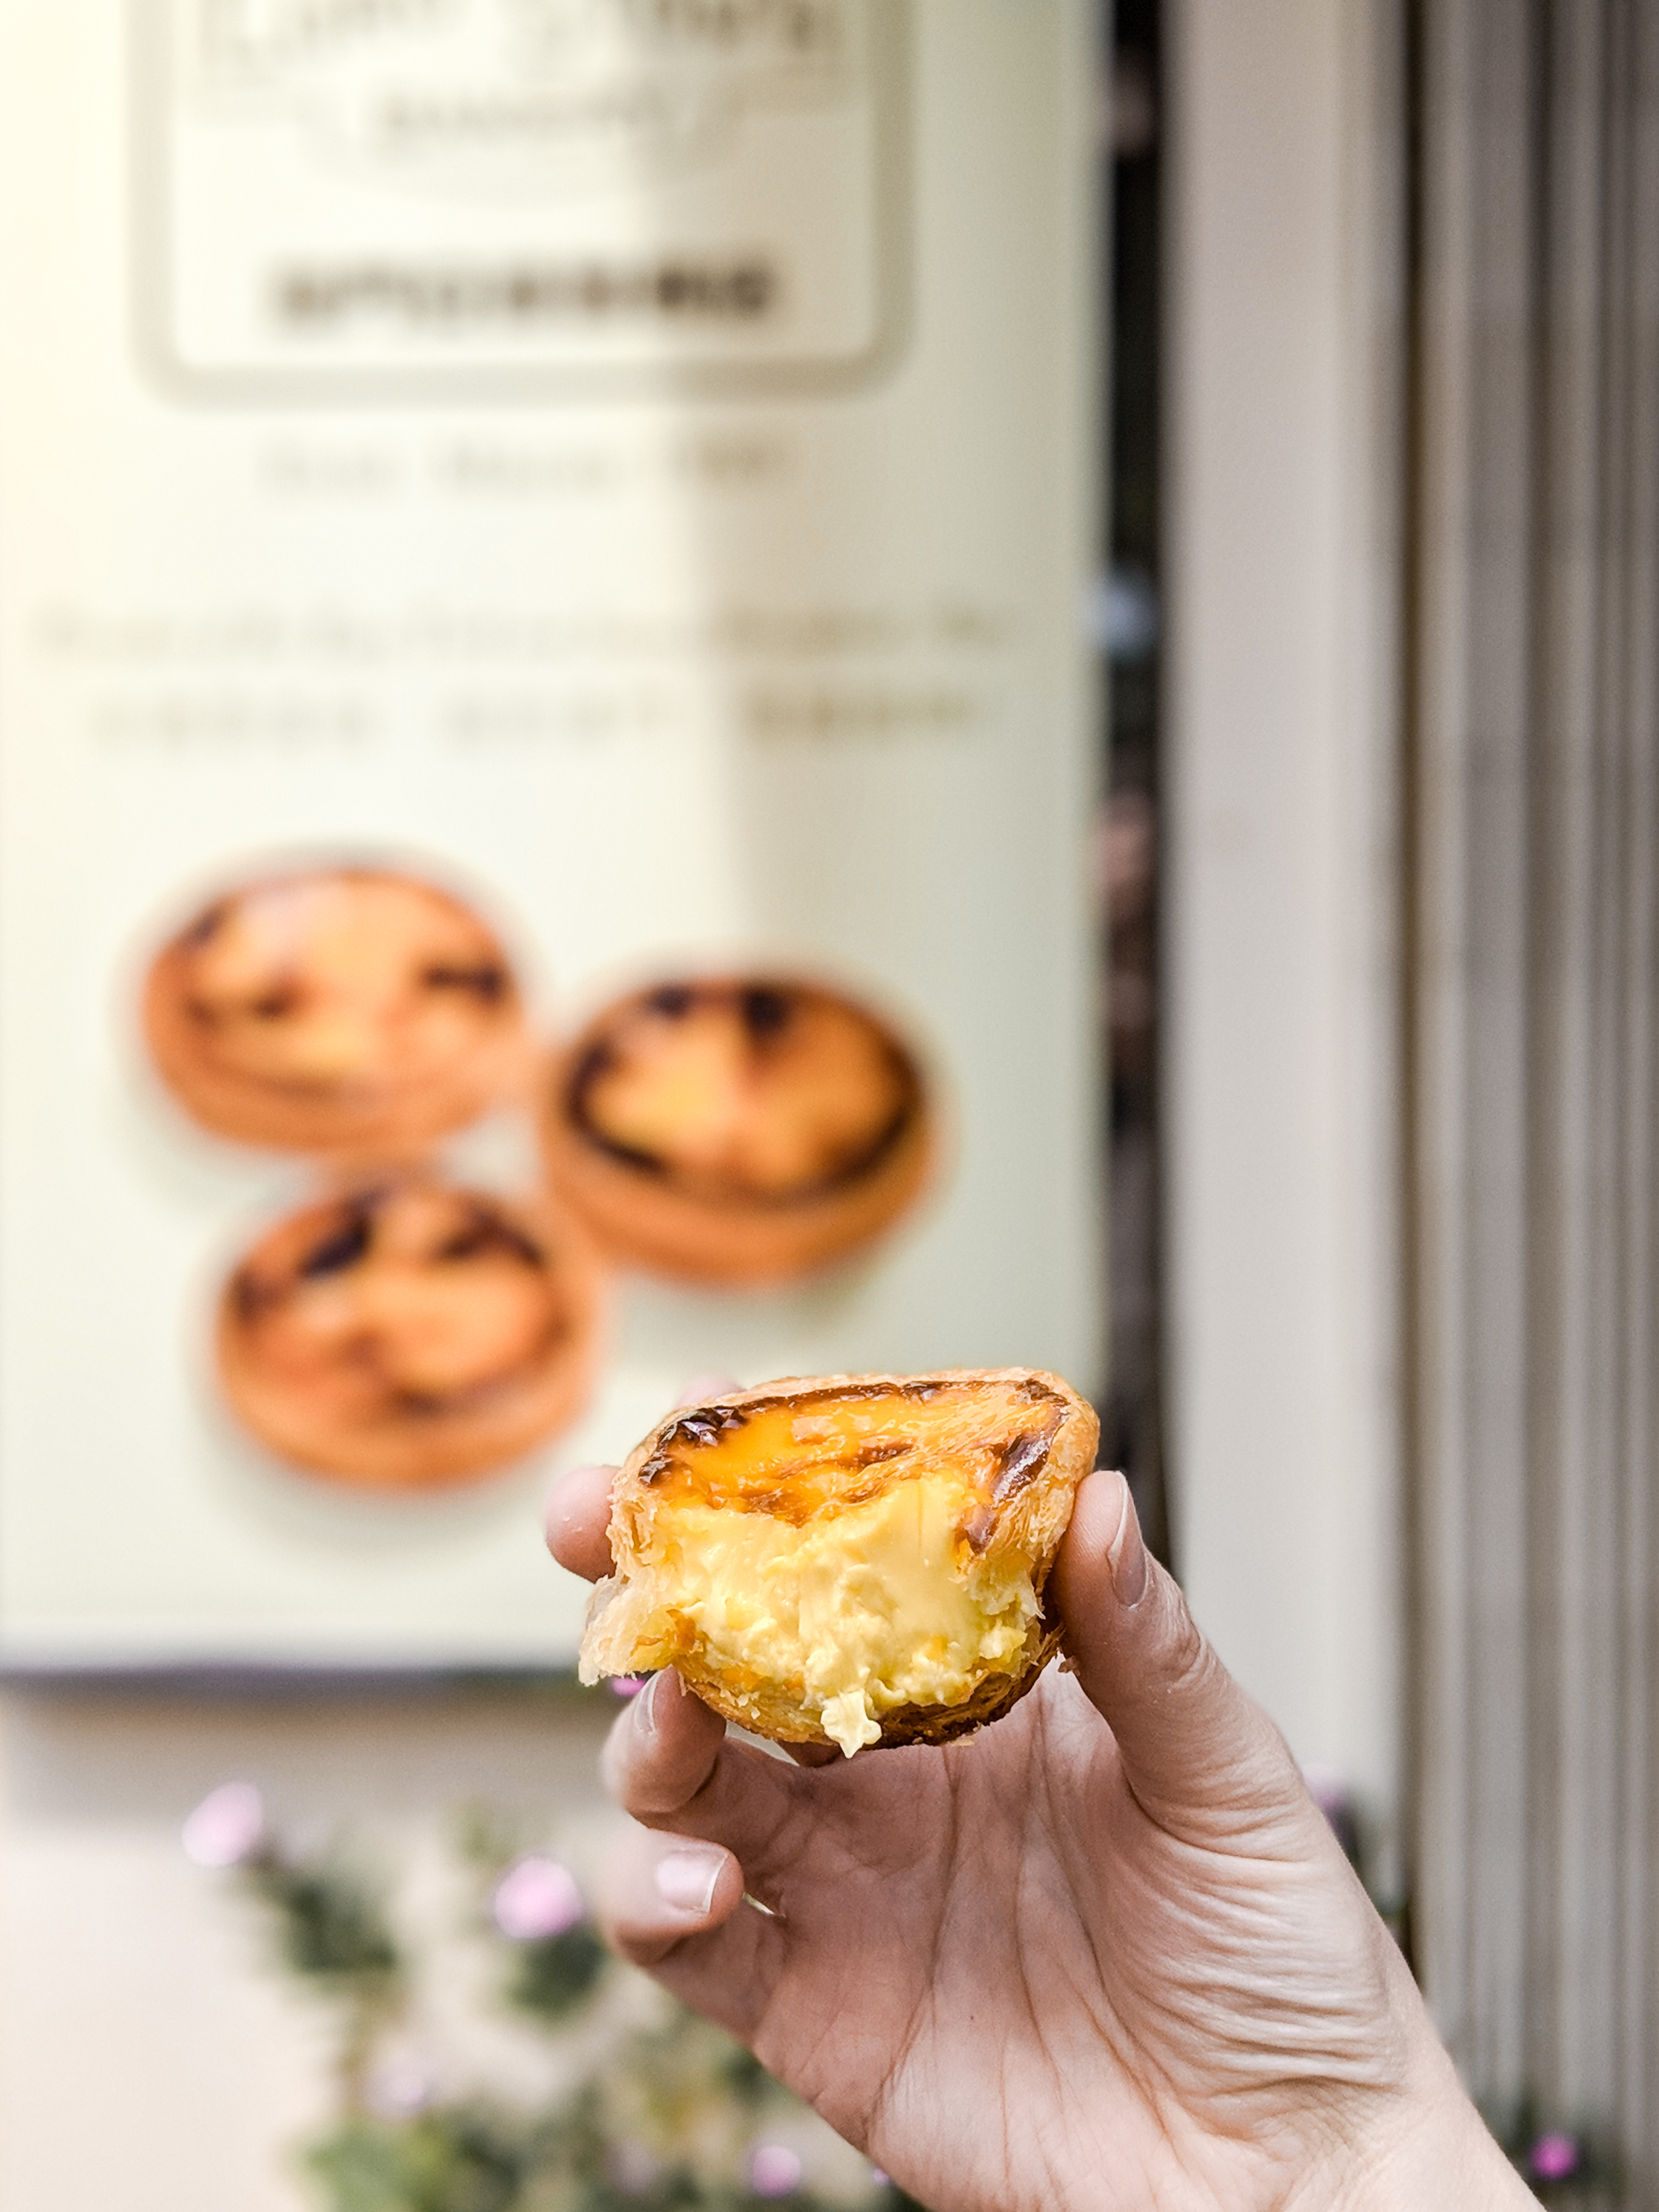 7.Macao Portuguese Tart at Lord Stow original bakery